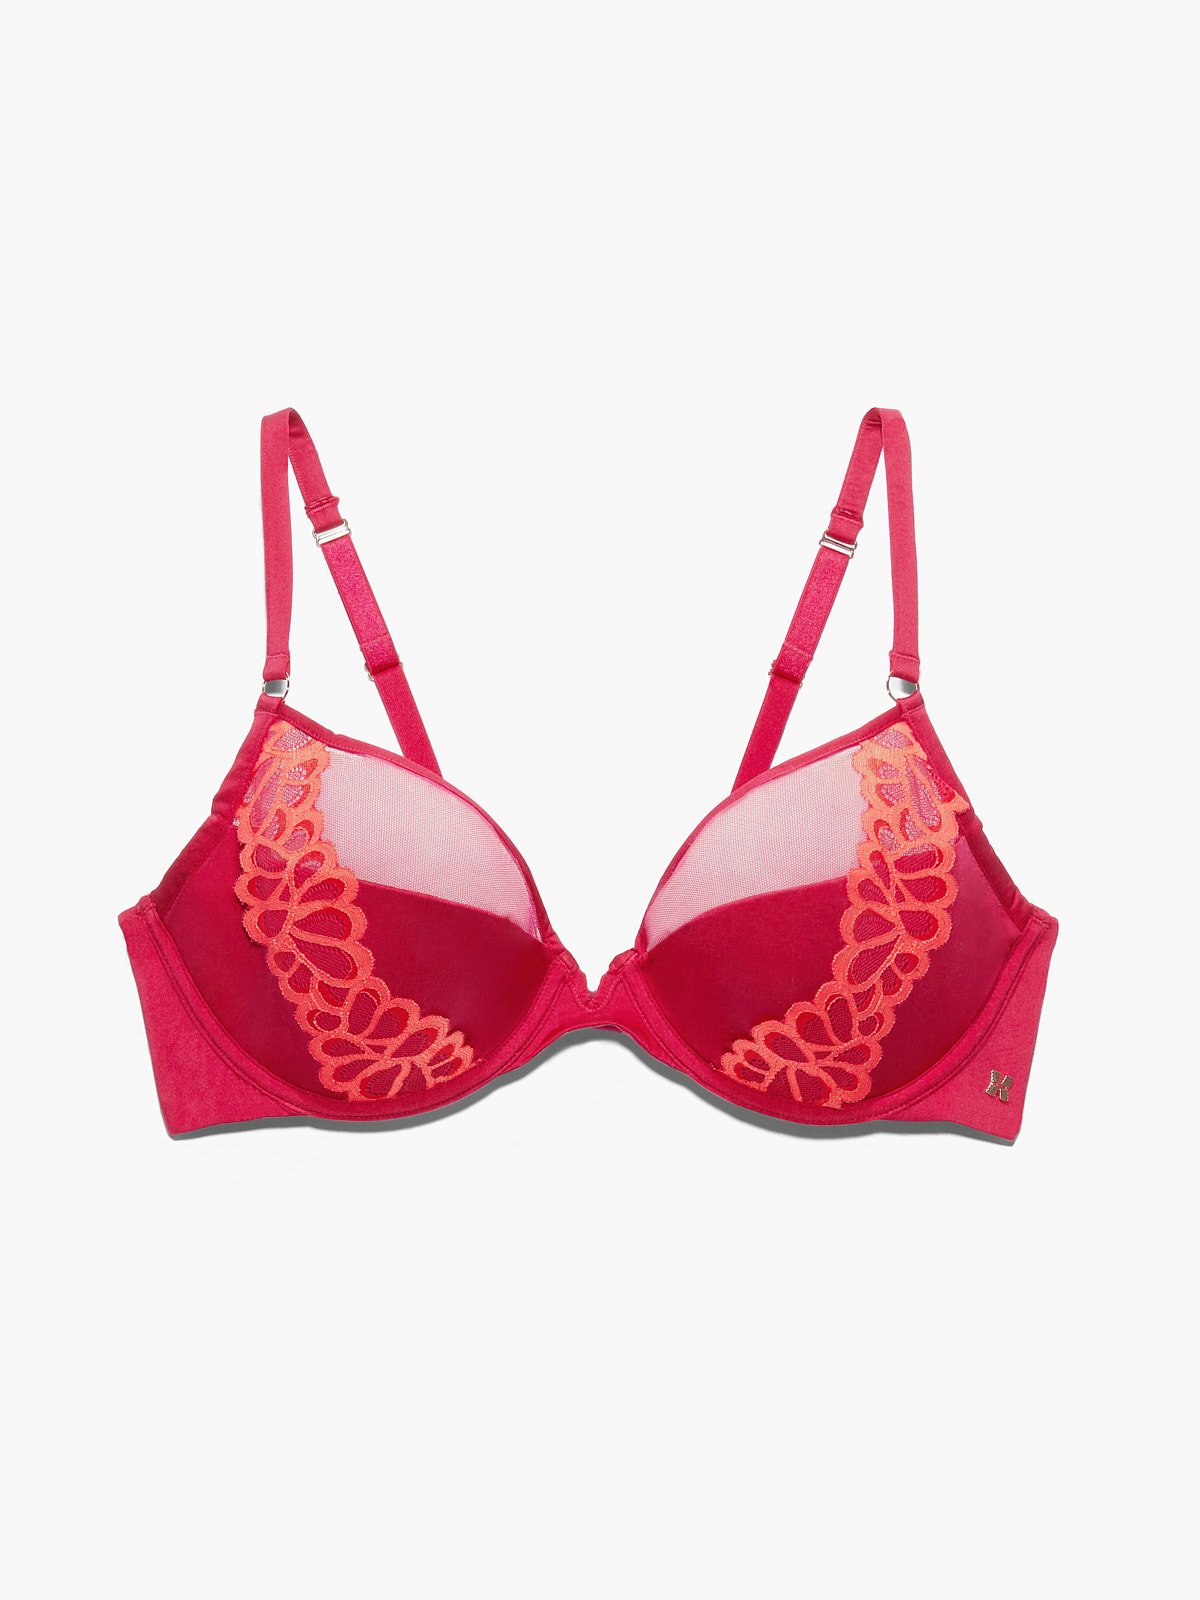 Savage Not Sorry Half Cup Bra with Lace in Pink & Red